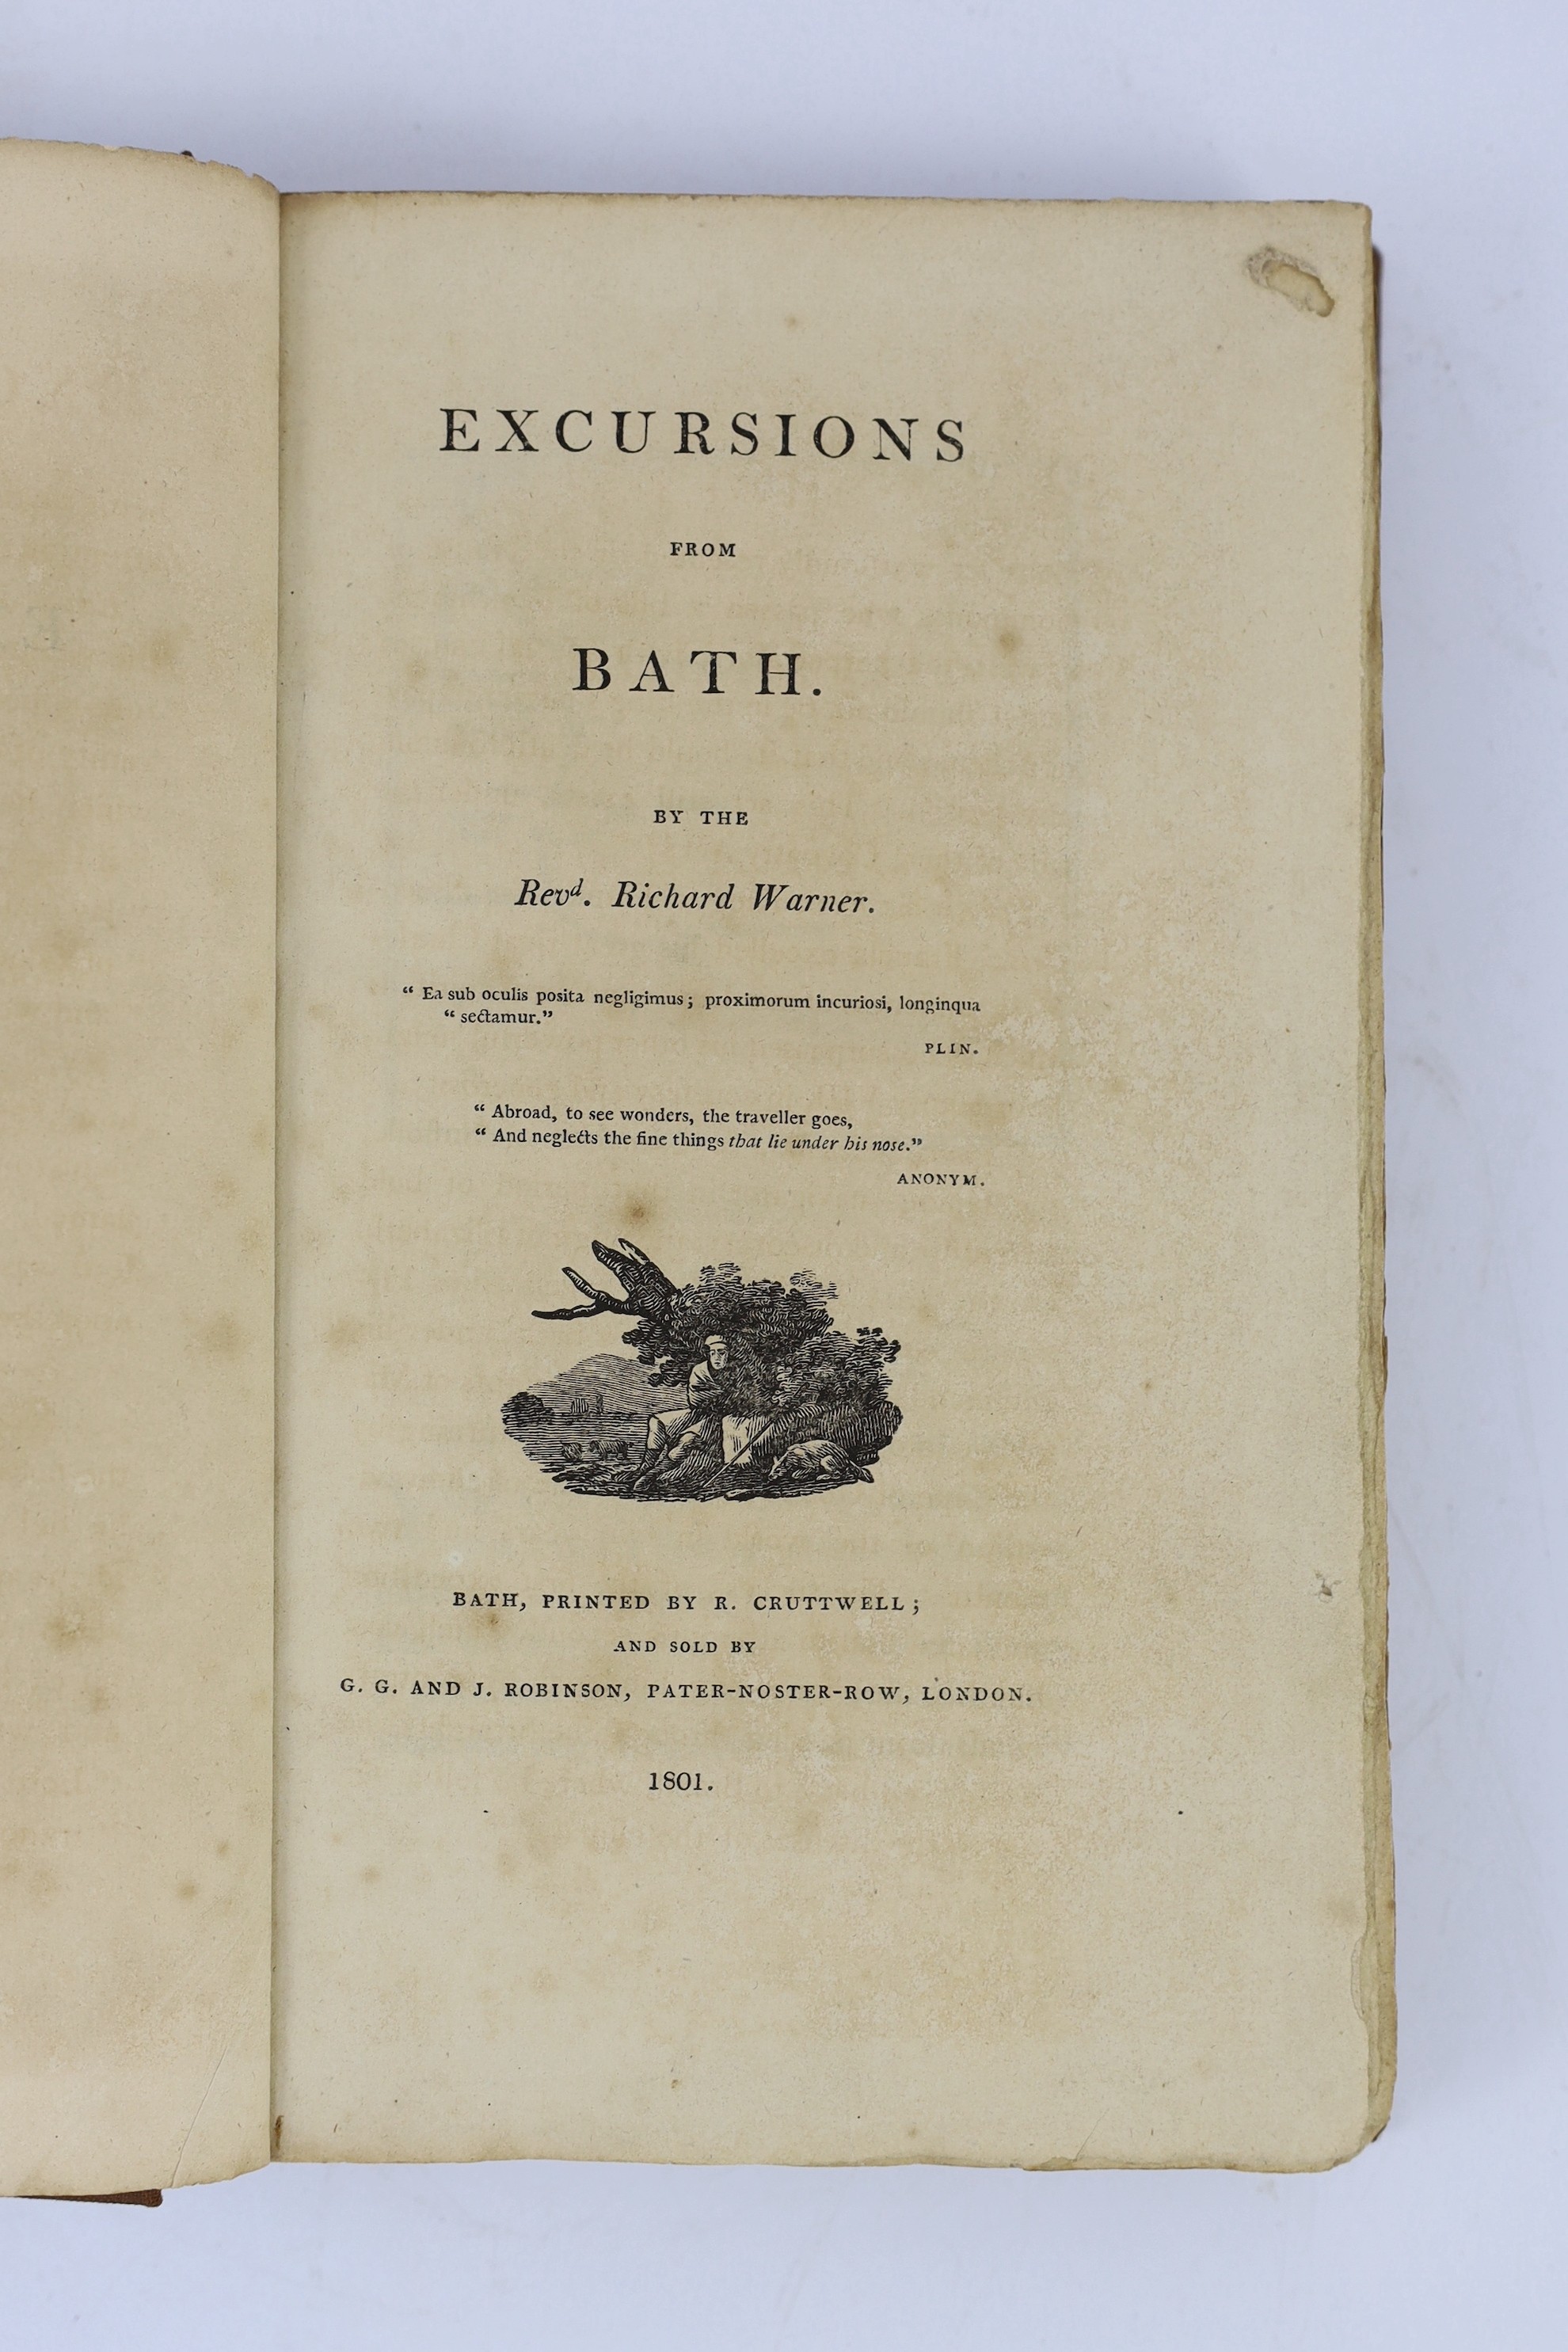 SOMERSET, BATH: Warner, Rev. Richard - Excursions from Bath. title vignette, text sketch maps; rebound cloth with old leather label. Bath, 1801. Cassan, Rev. Stephen Hyde - Lives of the Bishops of Bath and Wells ... 2 vo